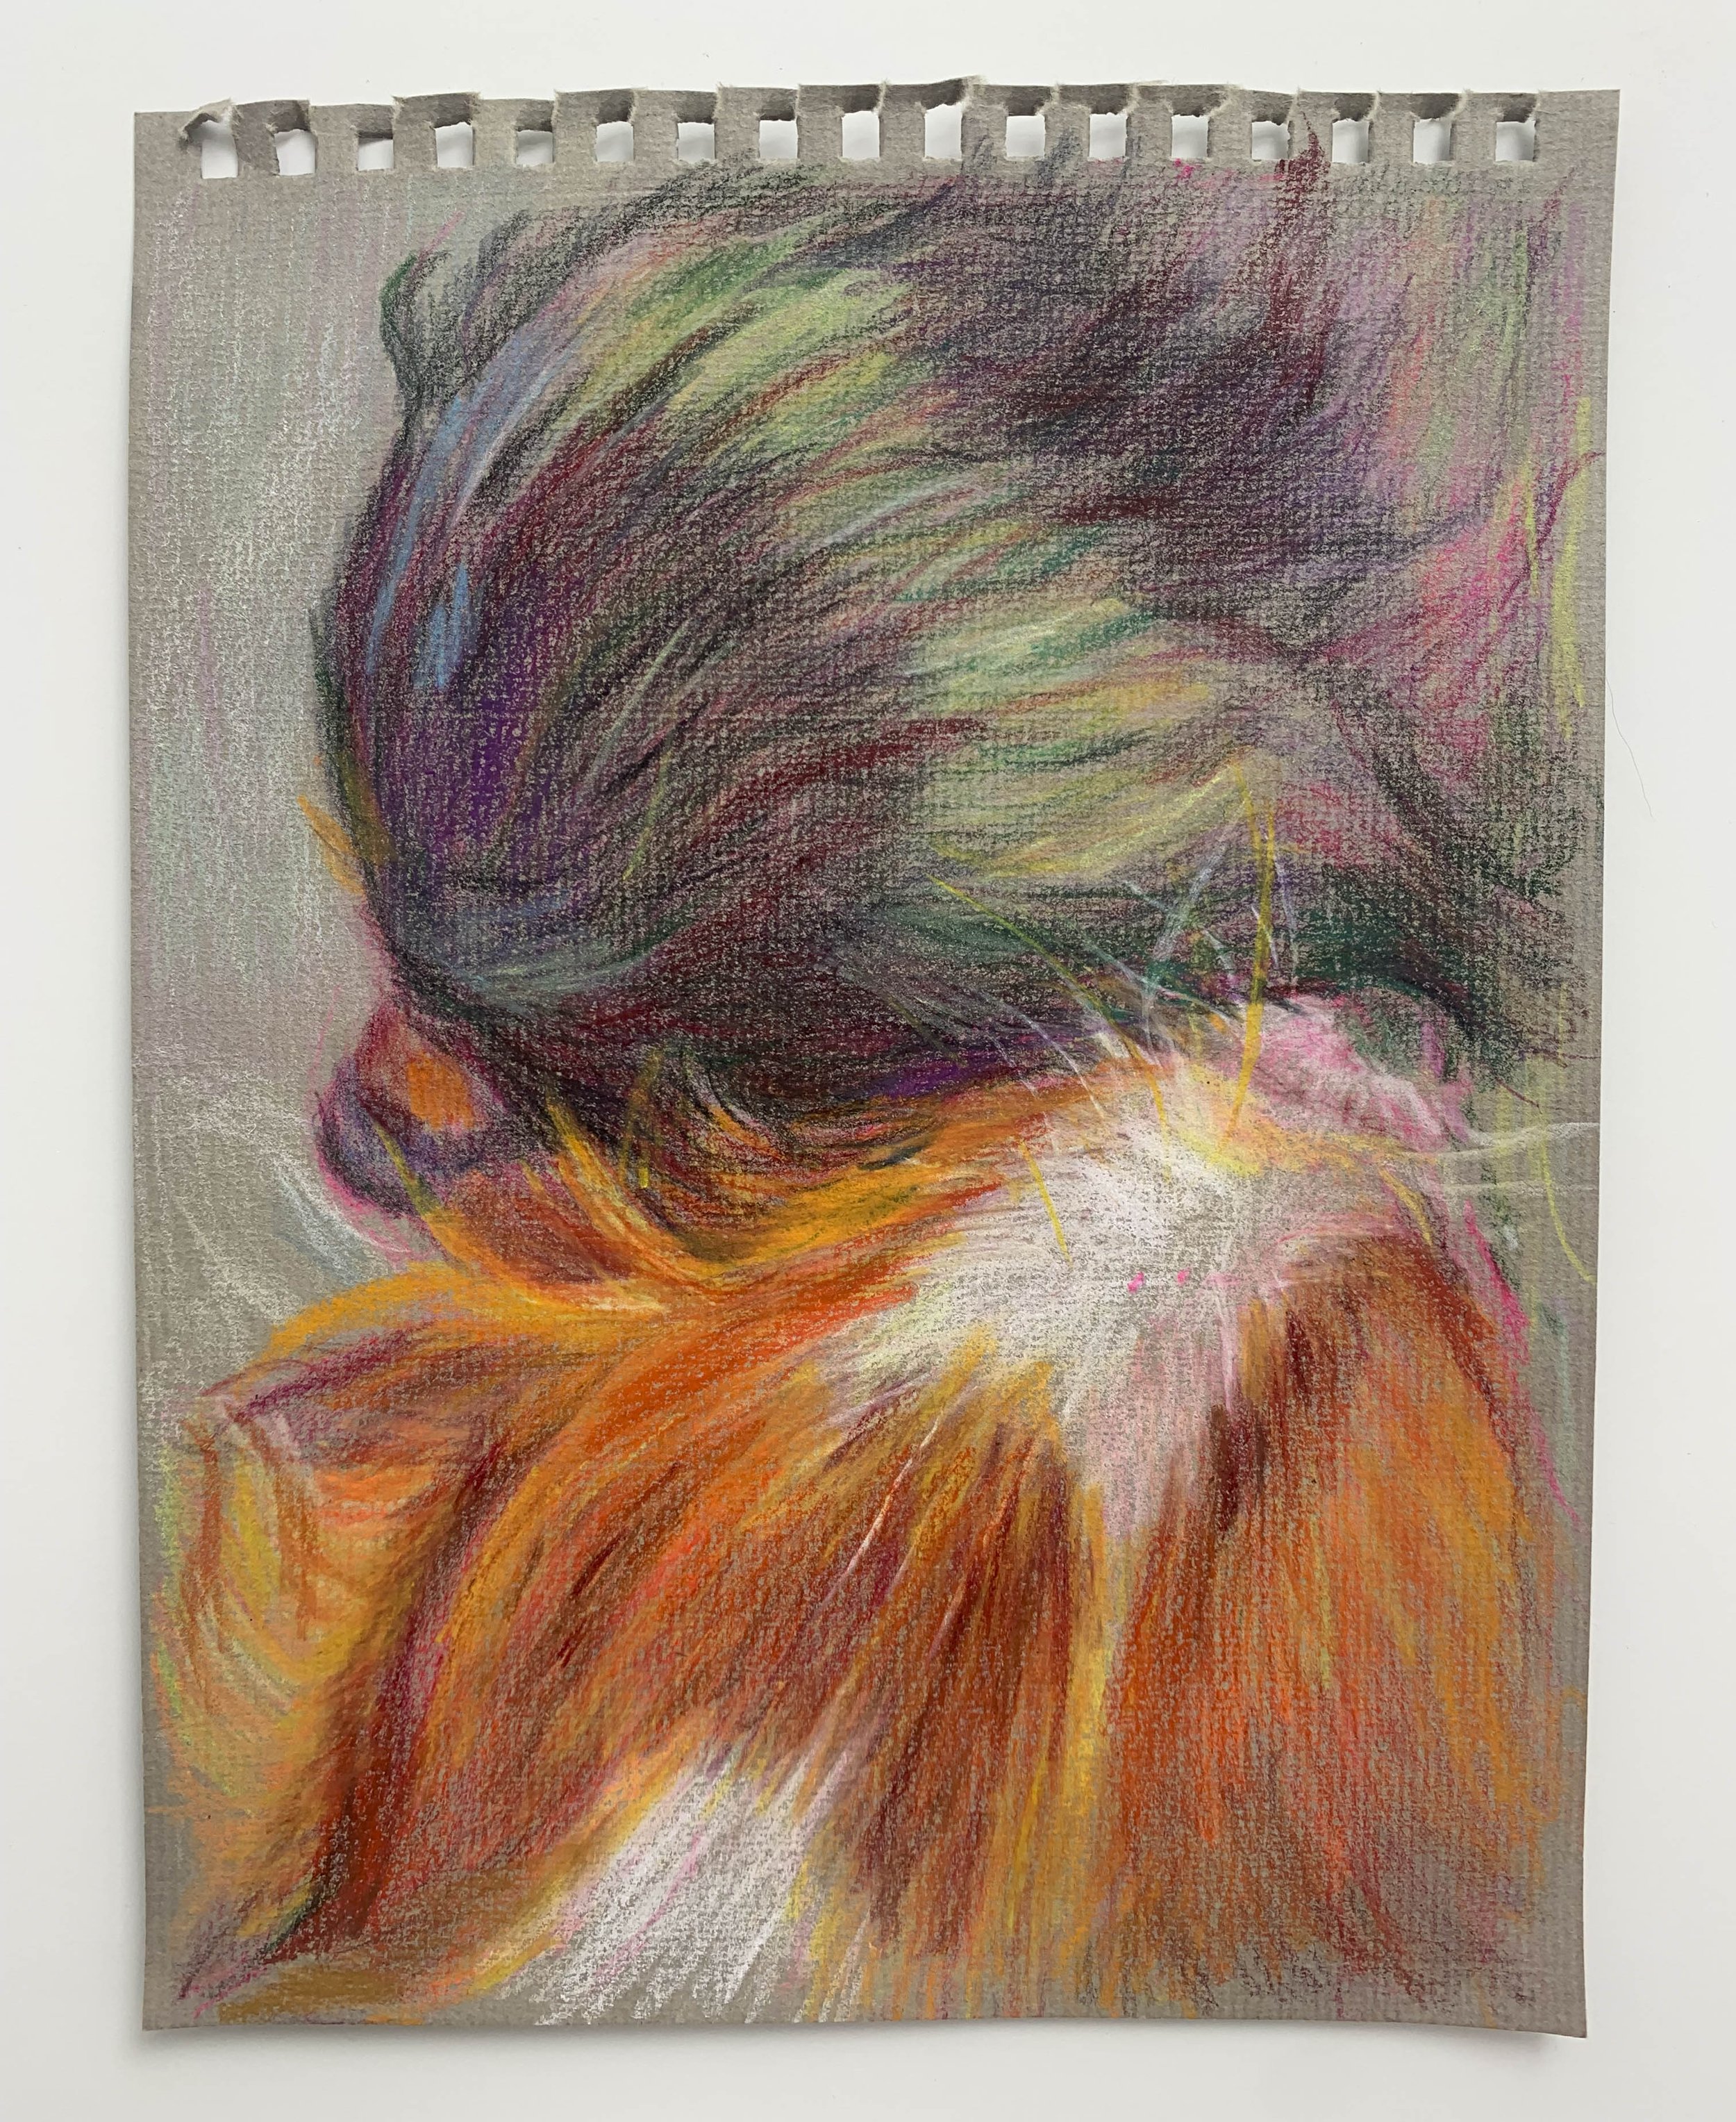   Heather Drayzen ,  Double Trouble , 2023, color pencil and Caran D’Ache crayon on toned paper, 20.5 x 15.5 cm 